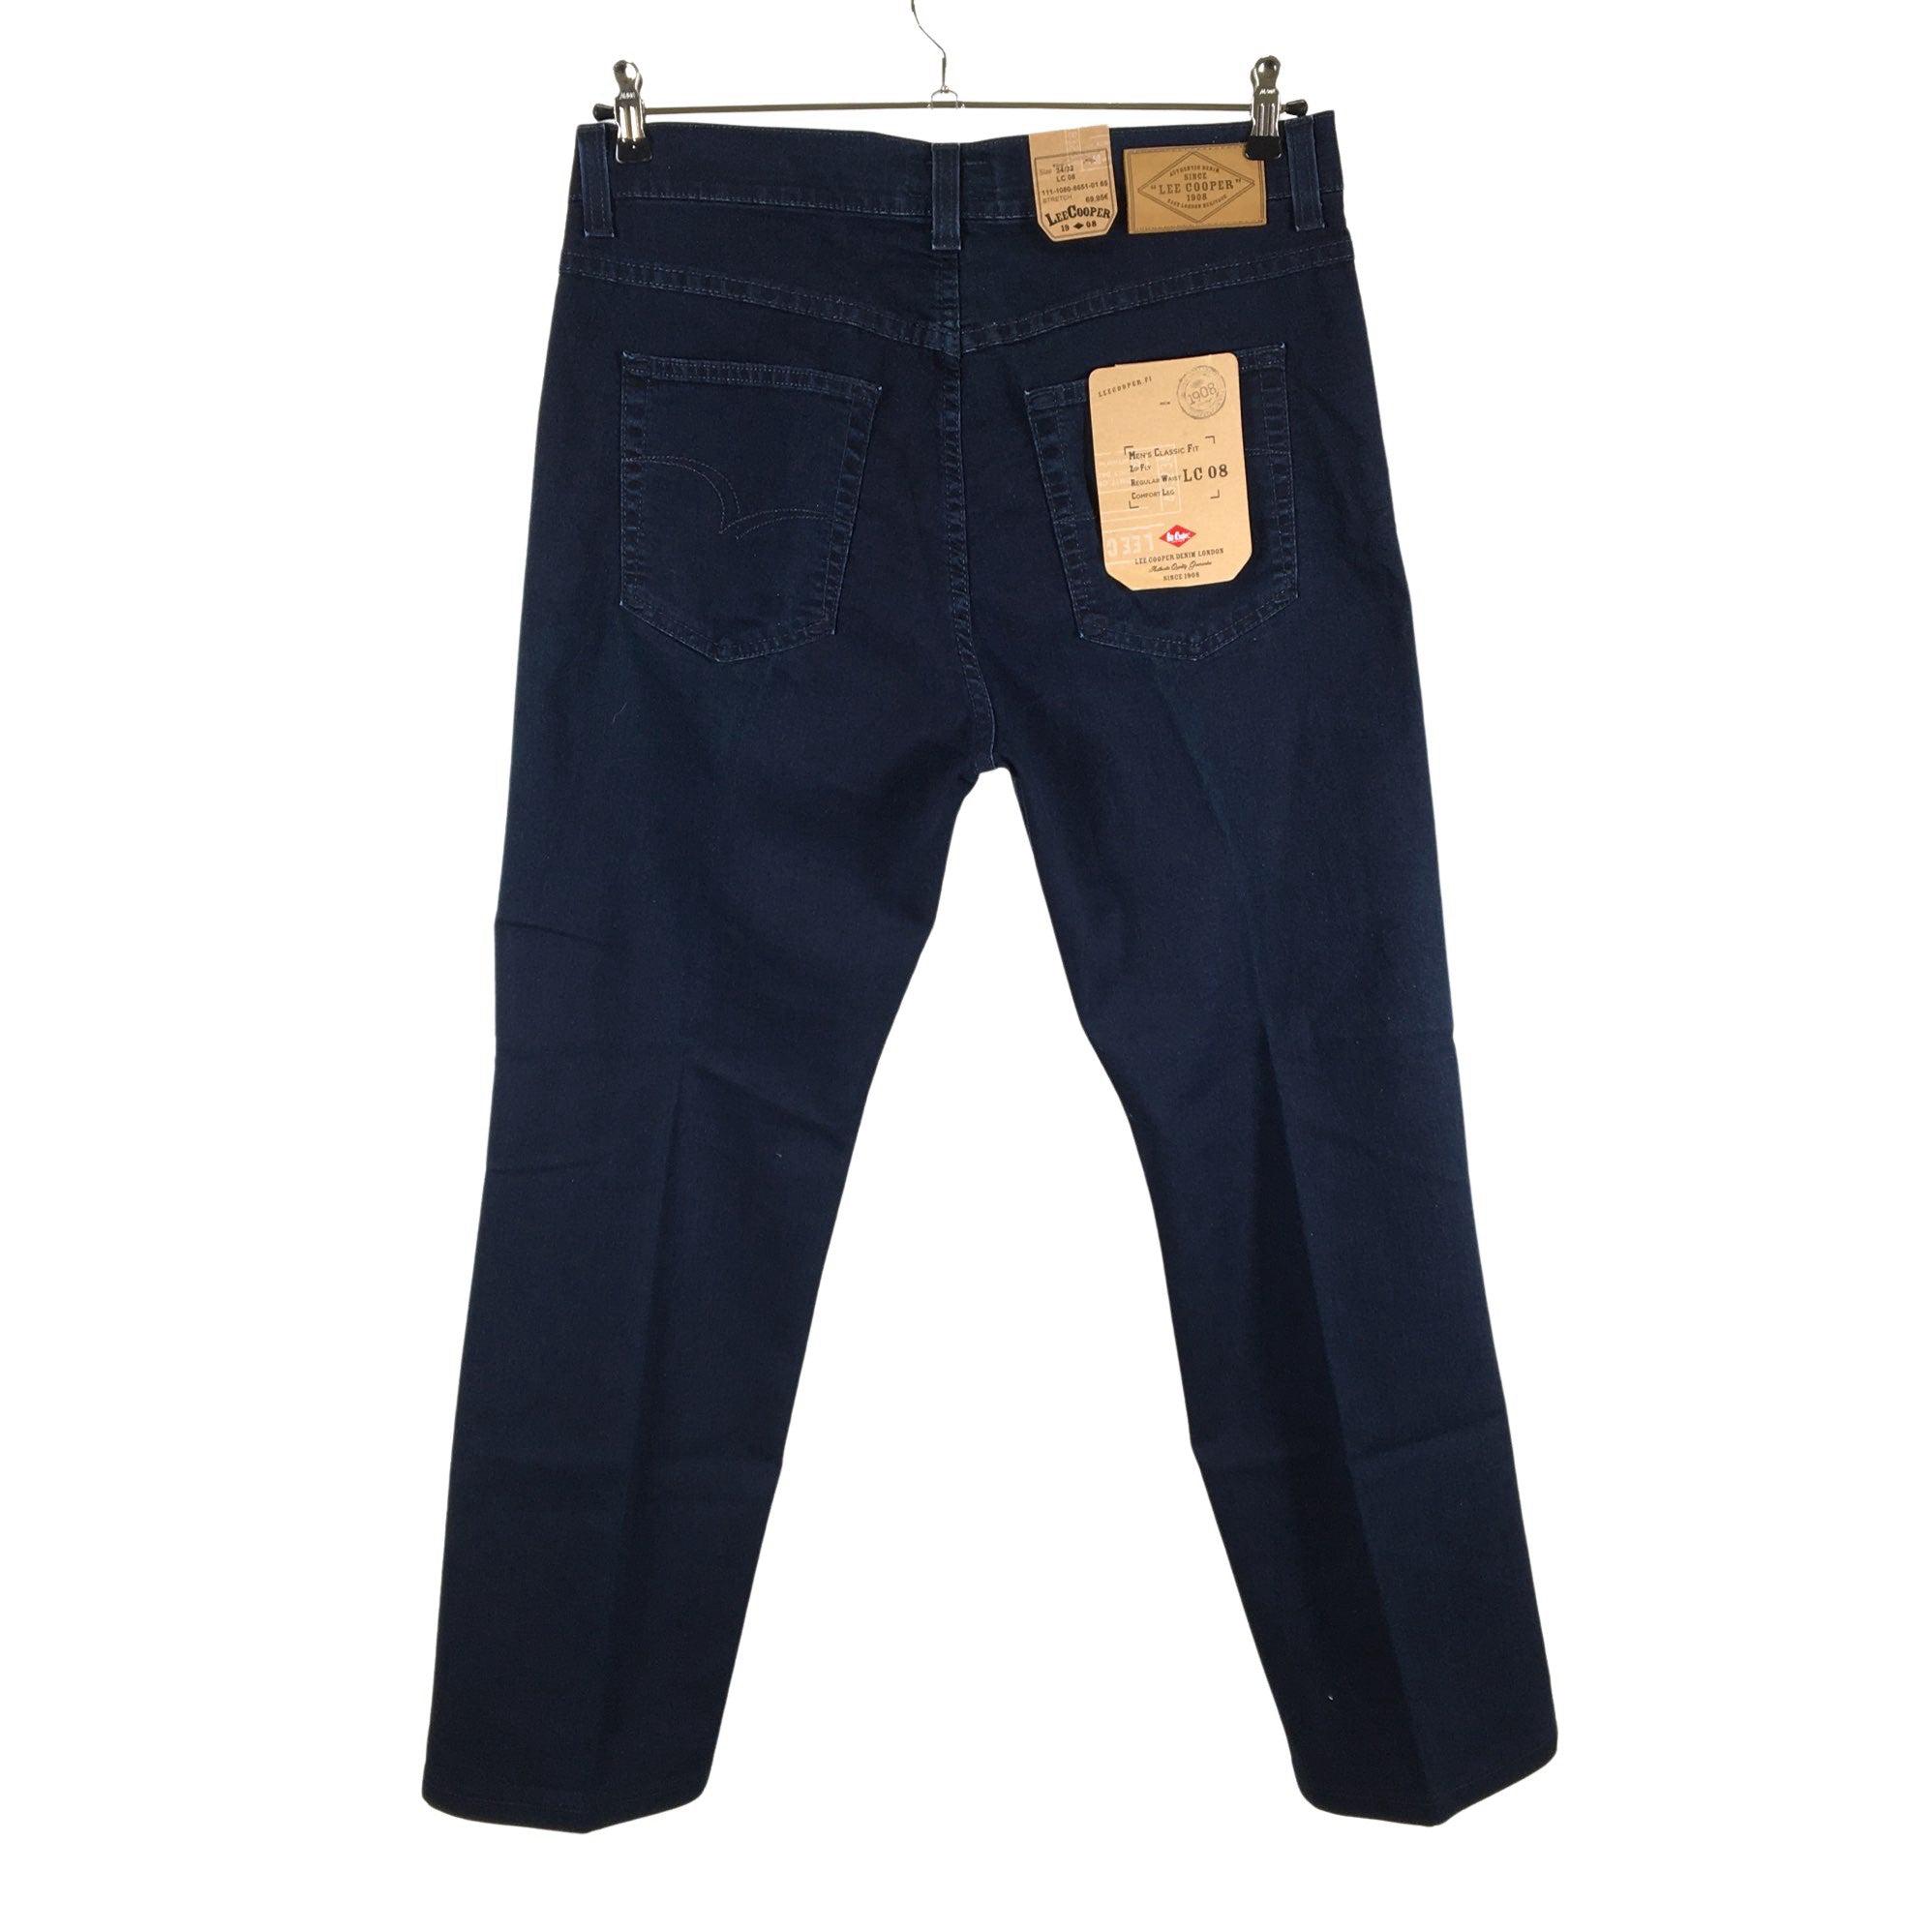 Lee Cooper Bootcut Jeans Mens Gents Pants Trousers India | Ubuy